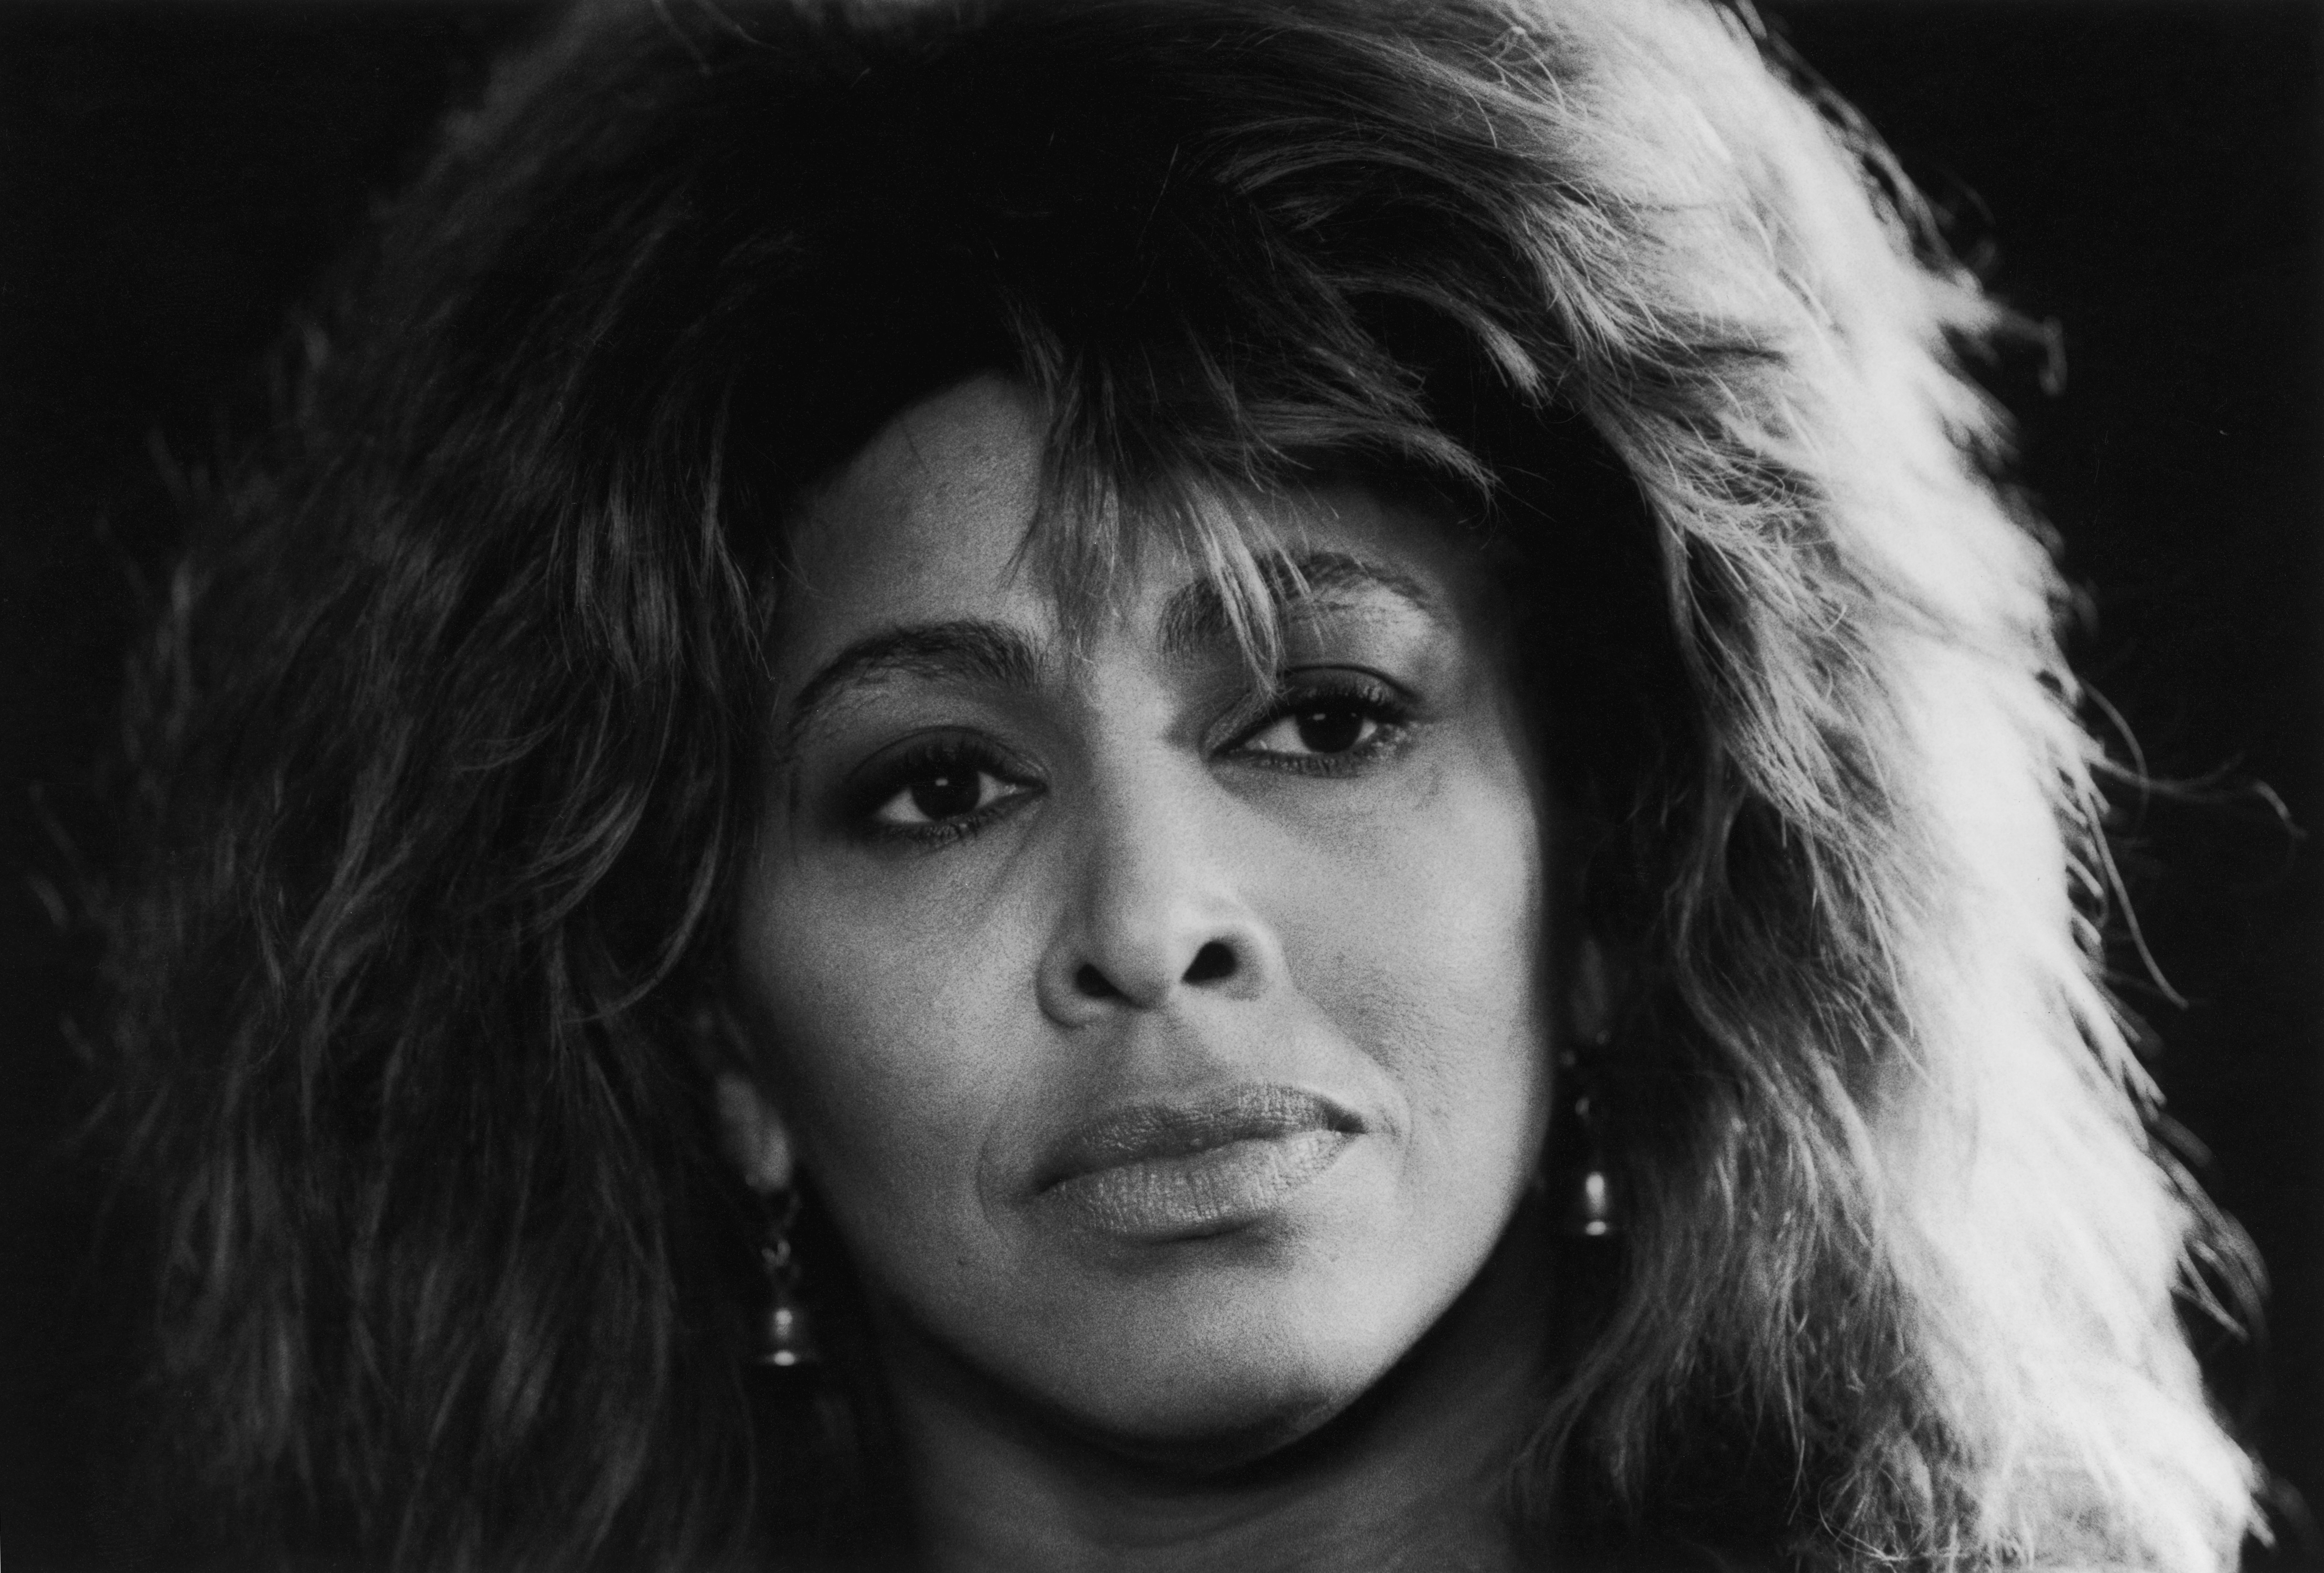 Tina Turner in a portrait photo taken in 1988 | Source: Getty Images